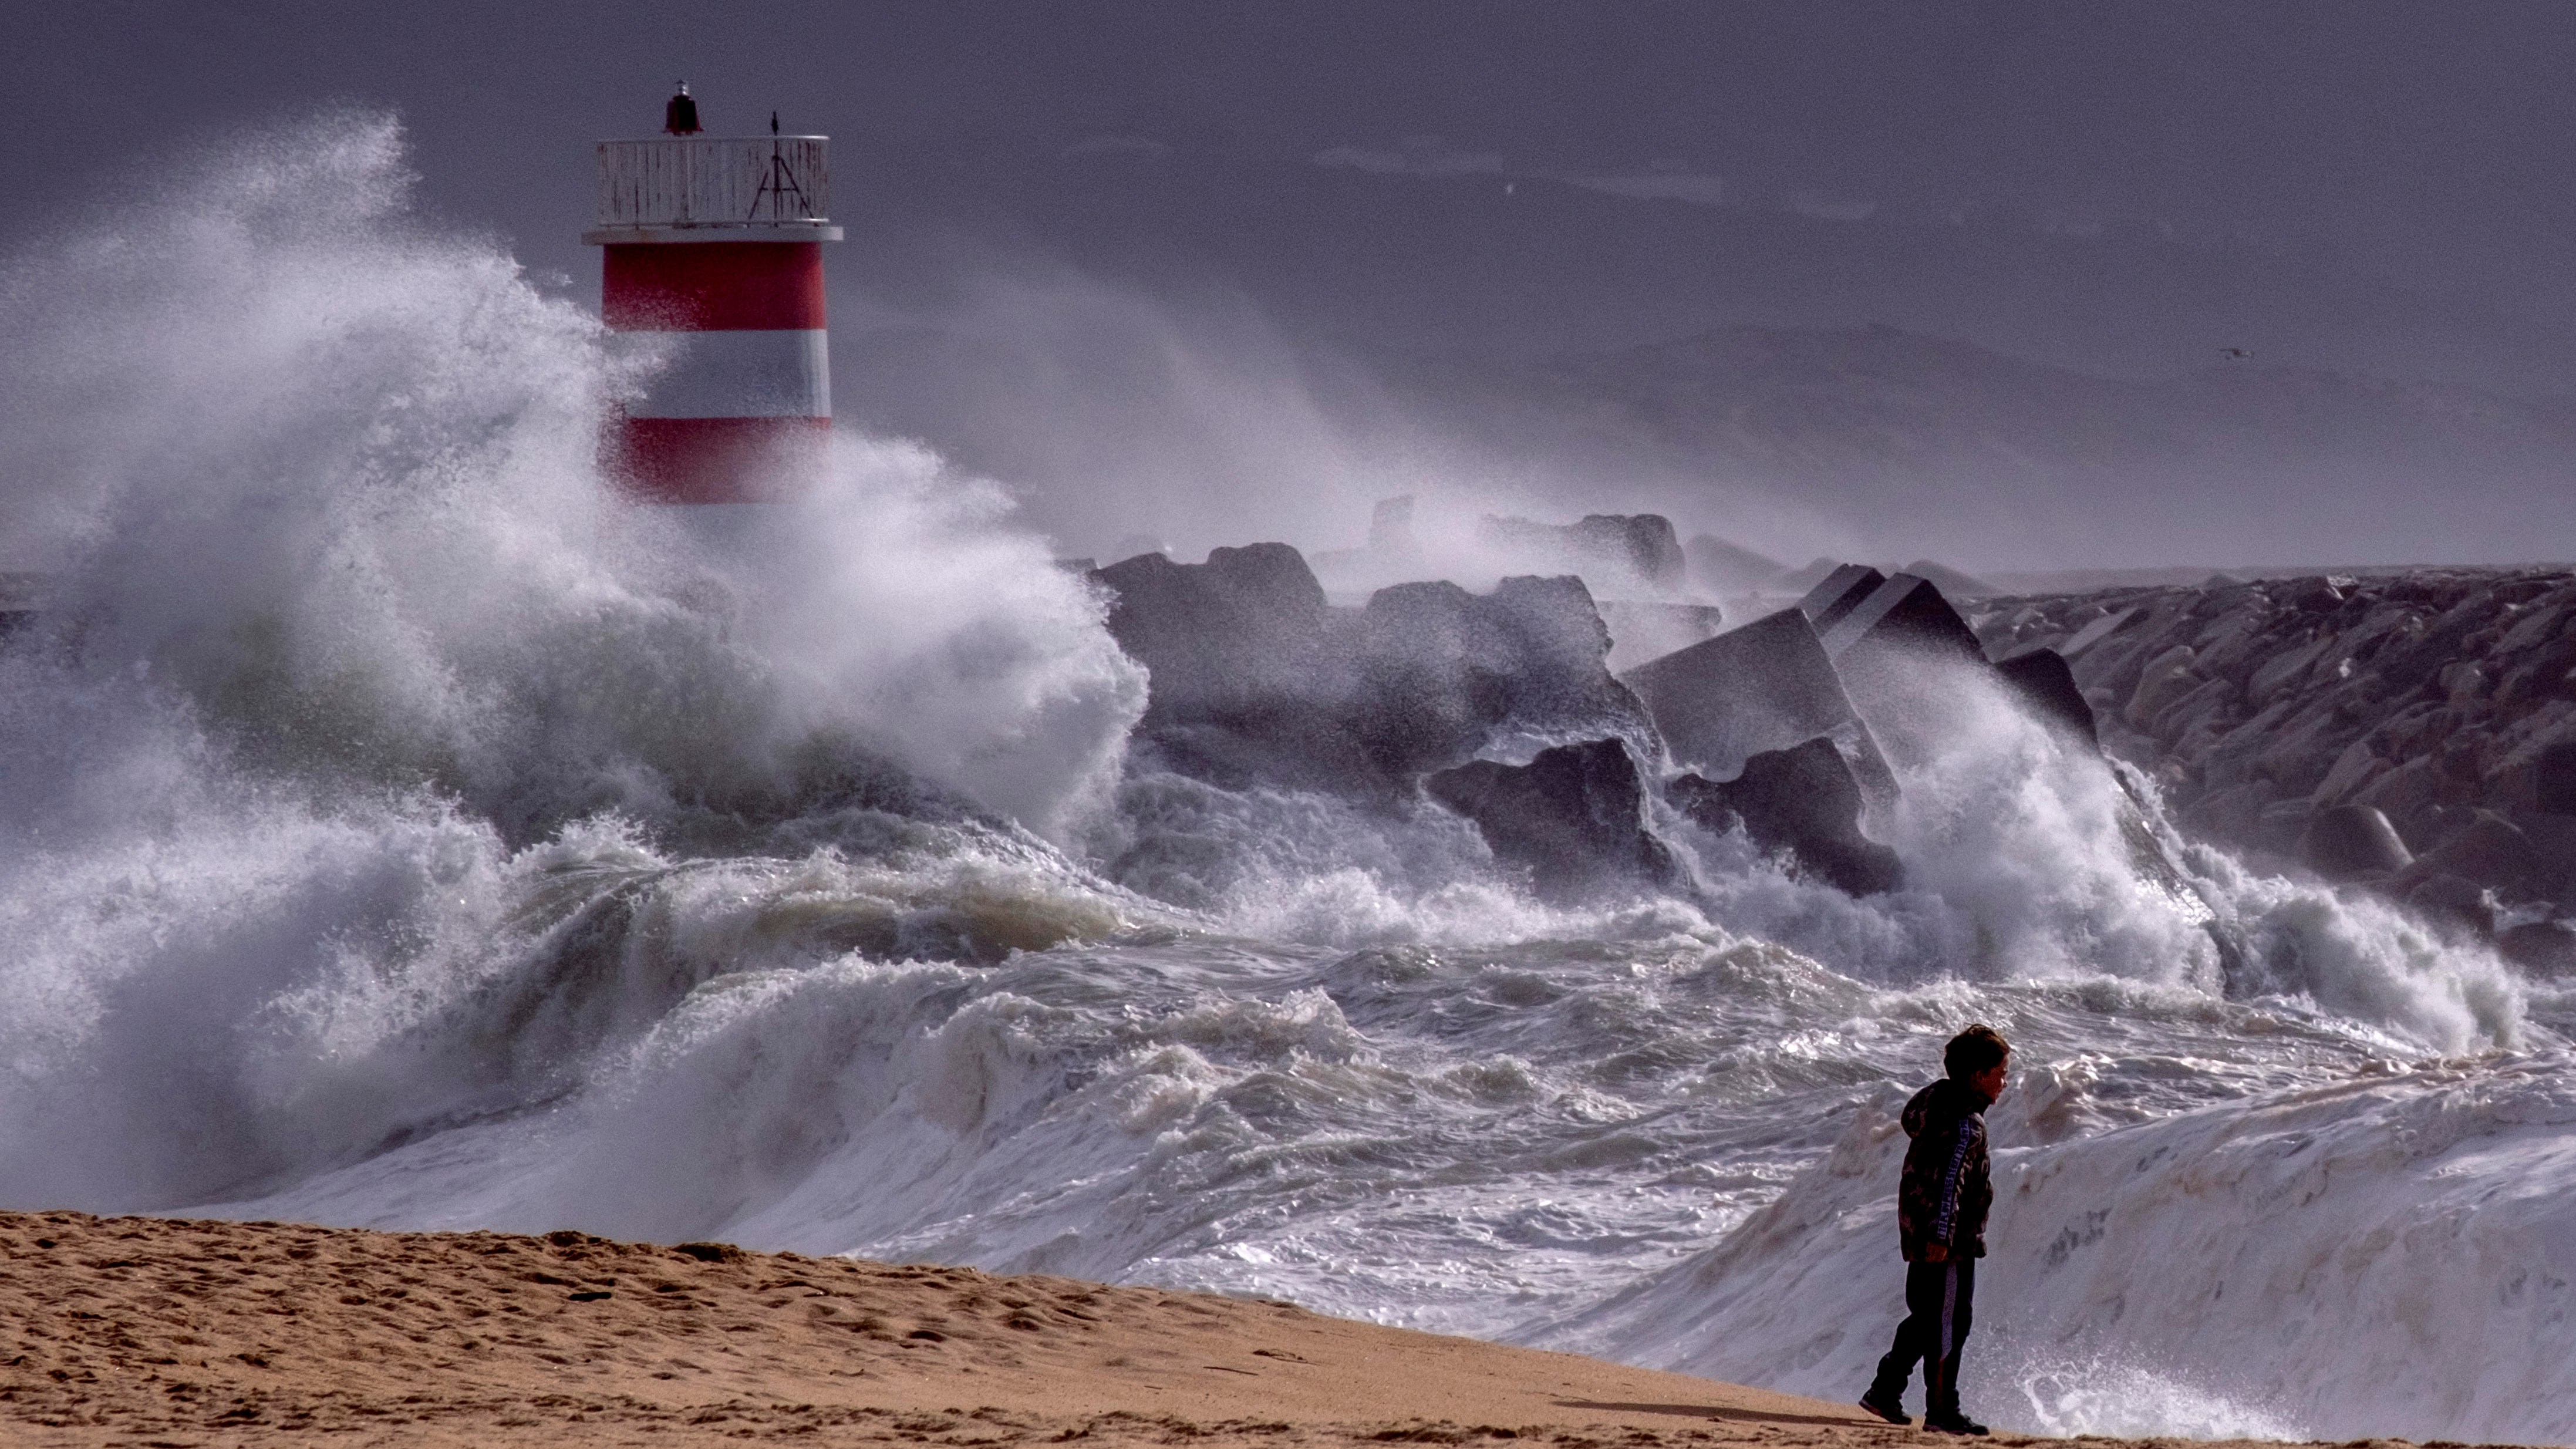 Residents of Nazare, Portugal, are accustomed to seeing powerful waves